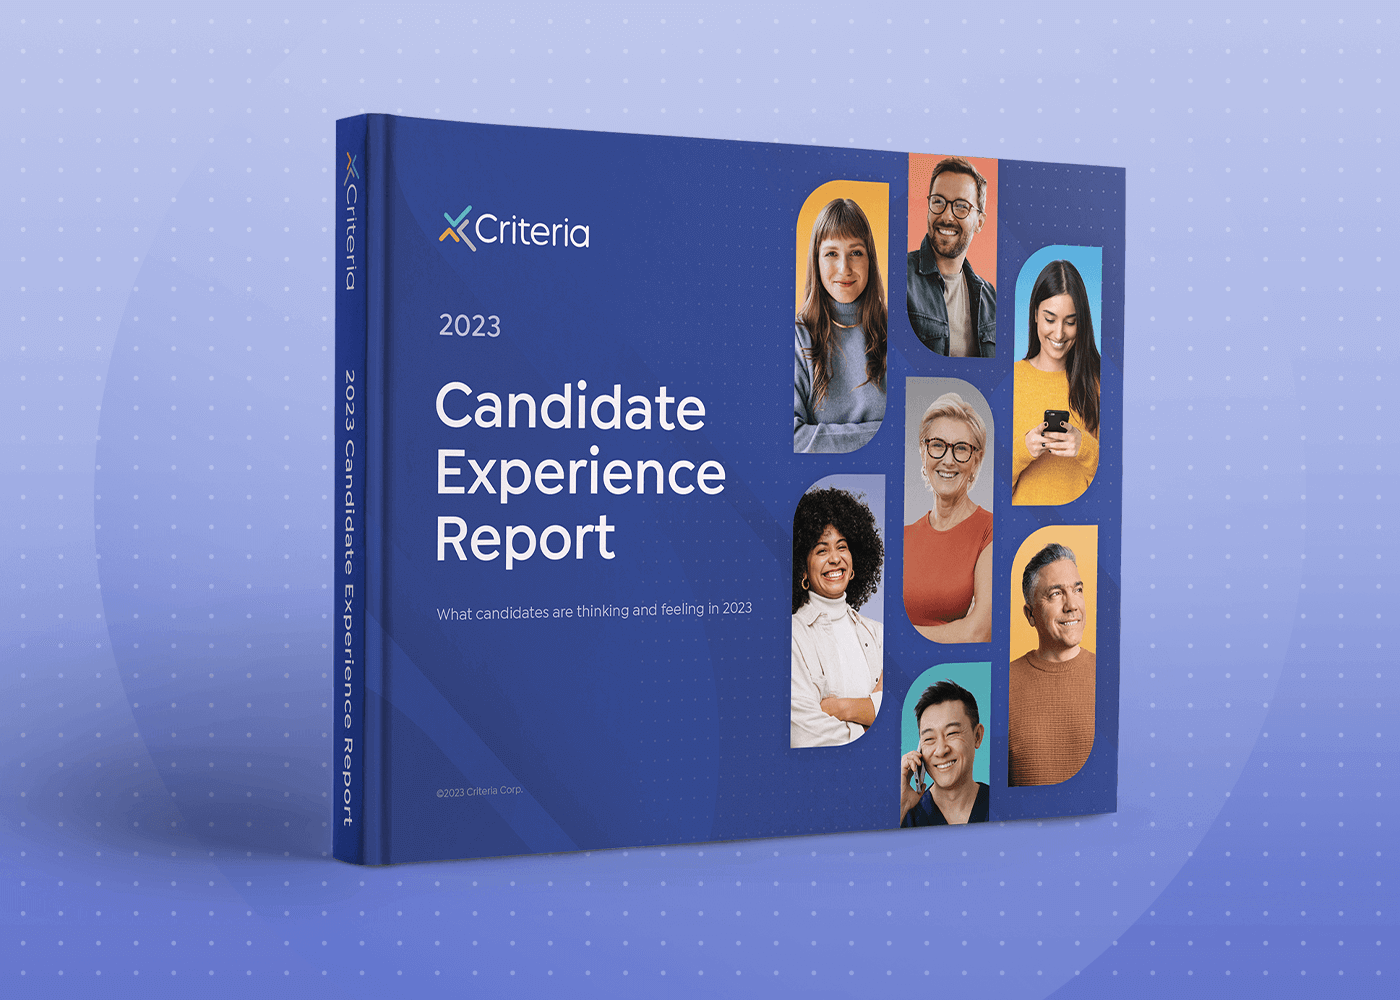 2023 Candidate Experience Report book cover